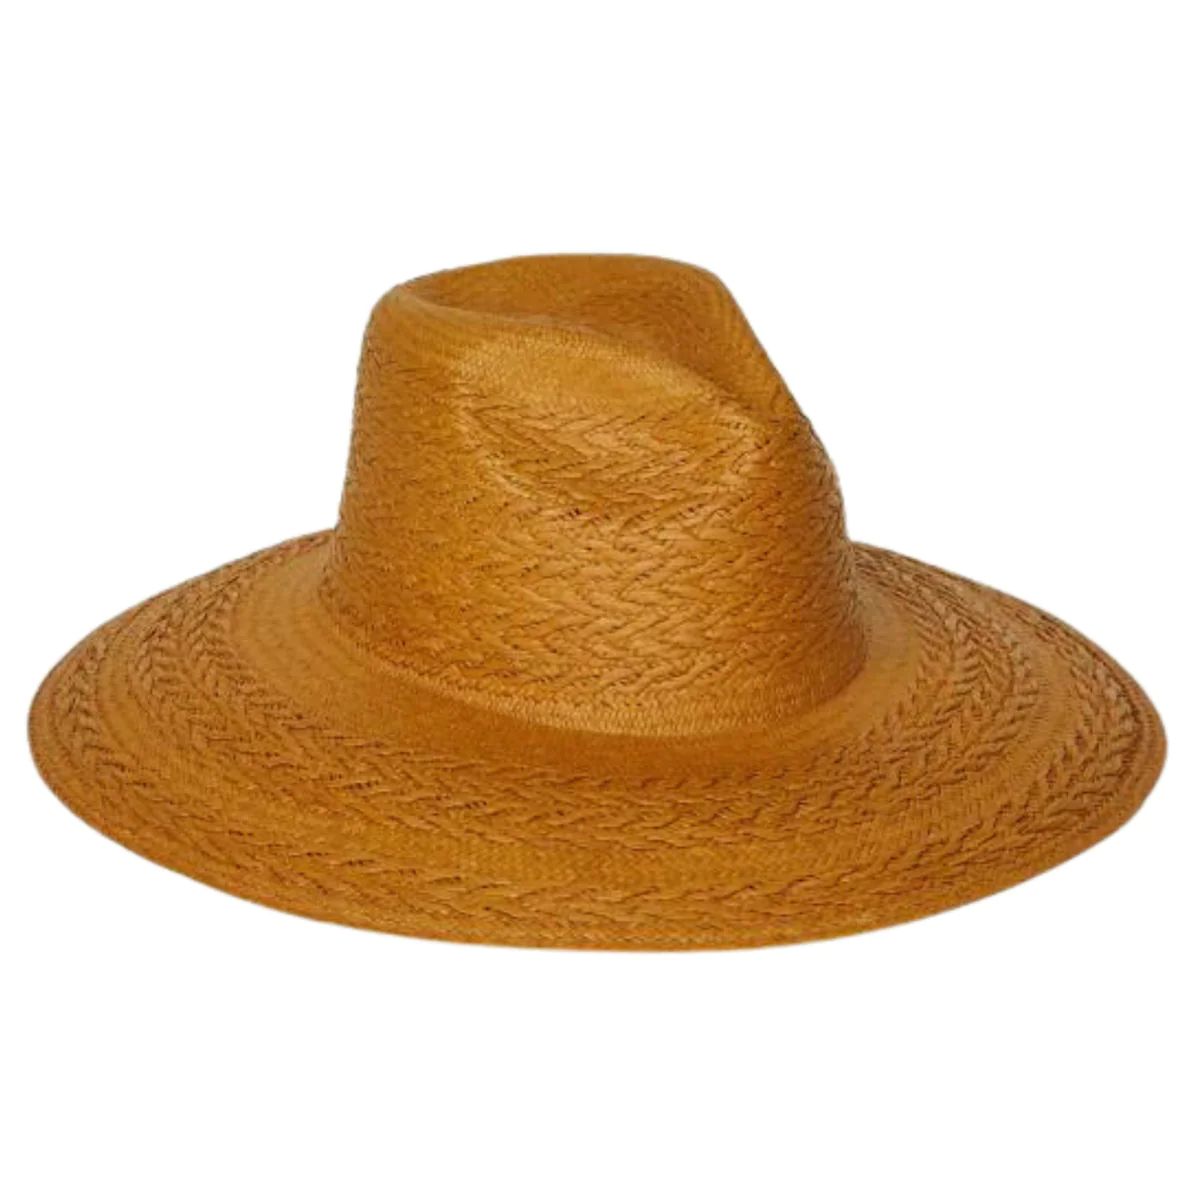 Redwood Broad-Brimmed Fedora | Over The Moon